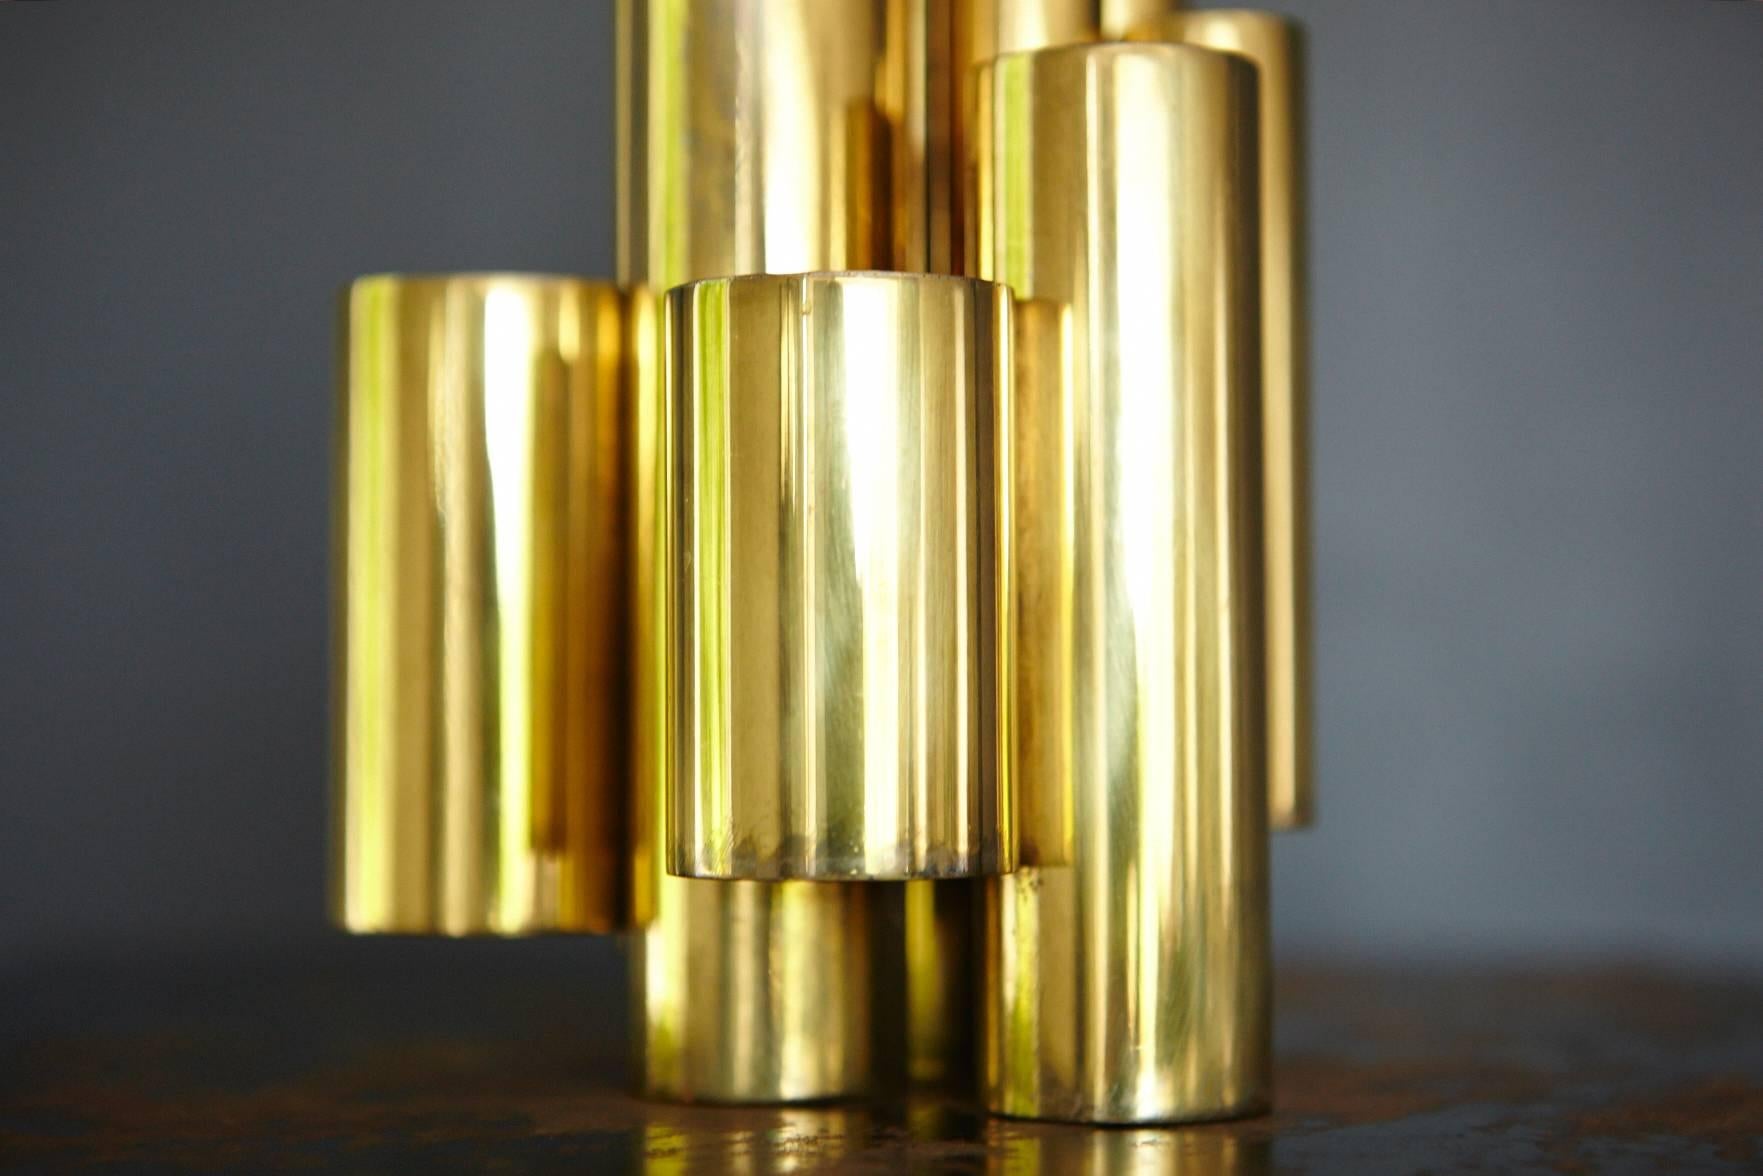 Mid-20th Century Sculptural Tubular Brass Candleholder in the Style of Gio Ponti for 5 candles